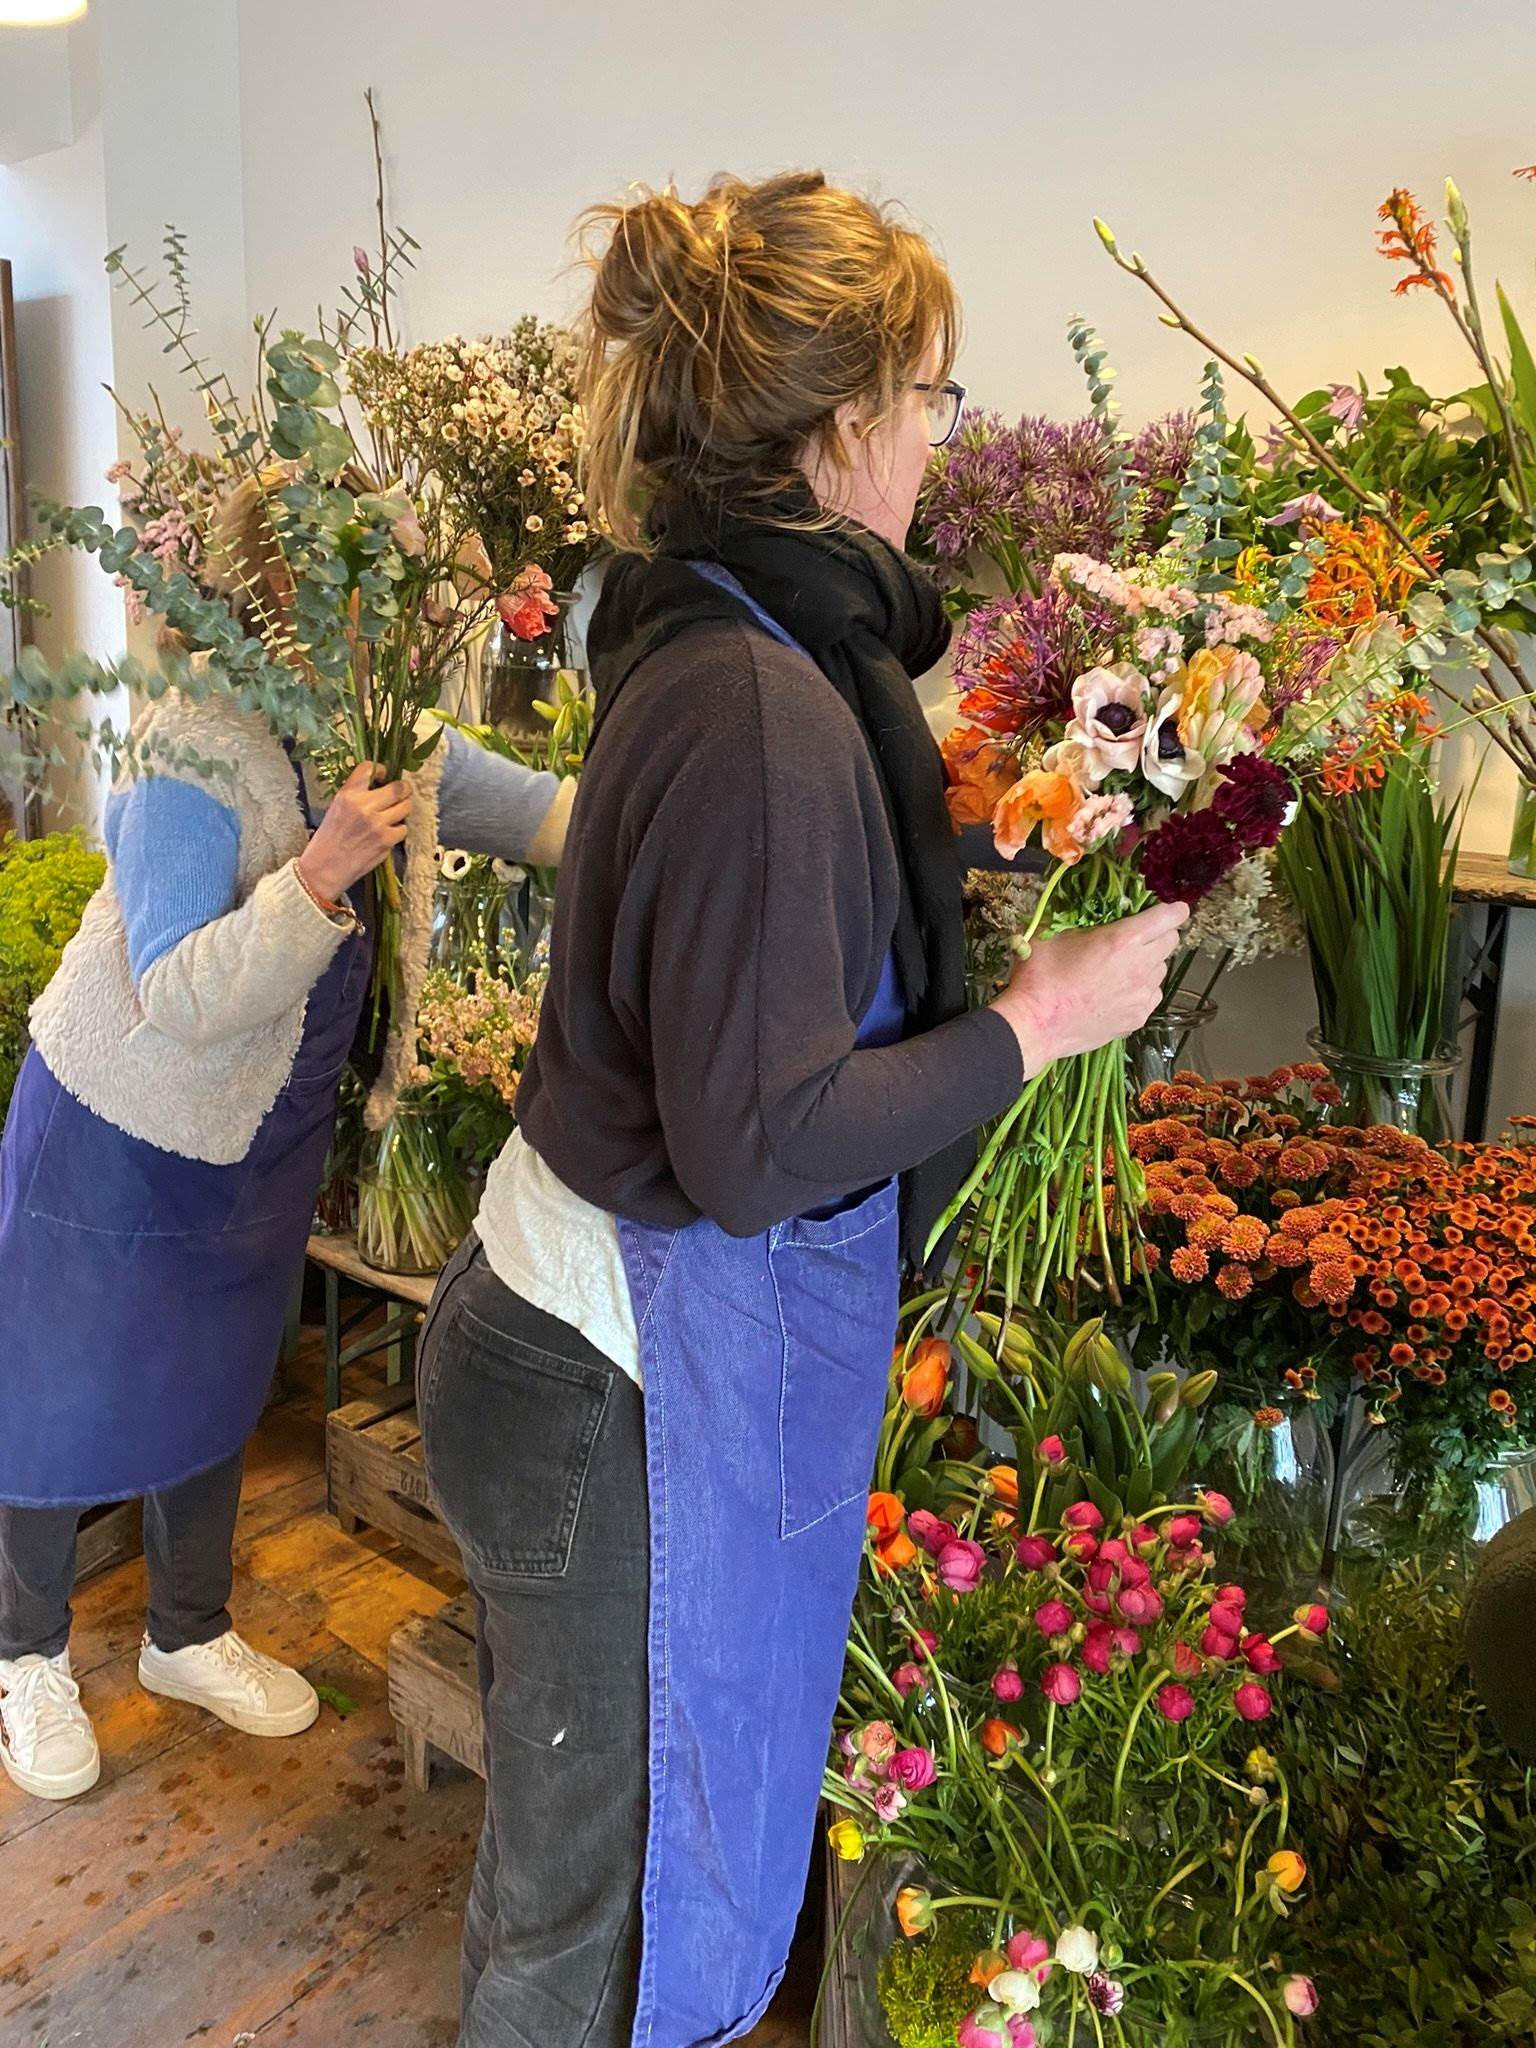 Professional floristry students selecting flowers from the flower stand